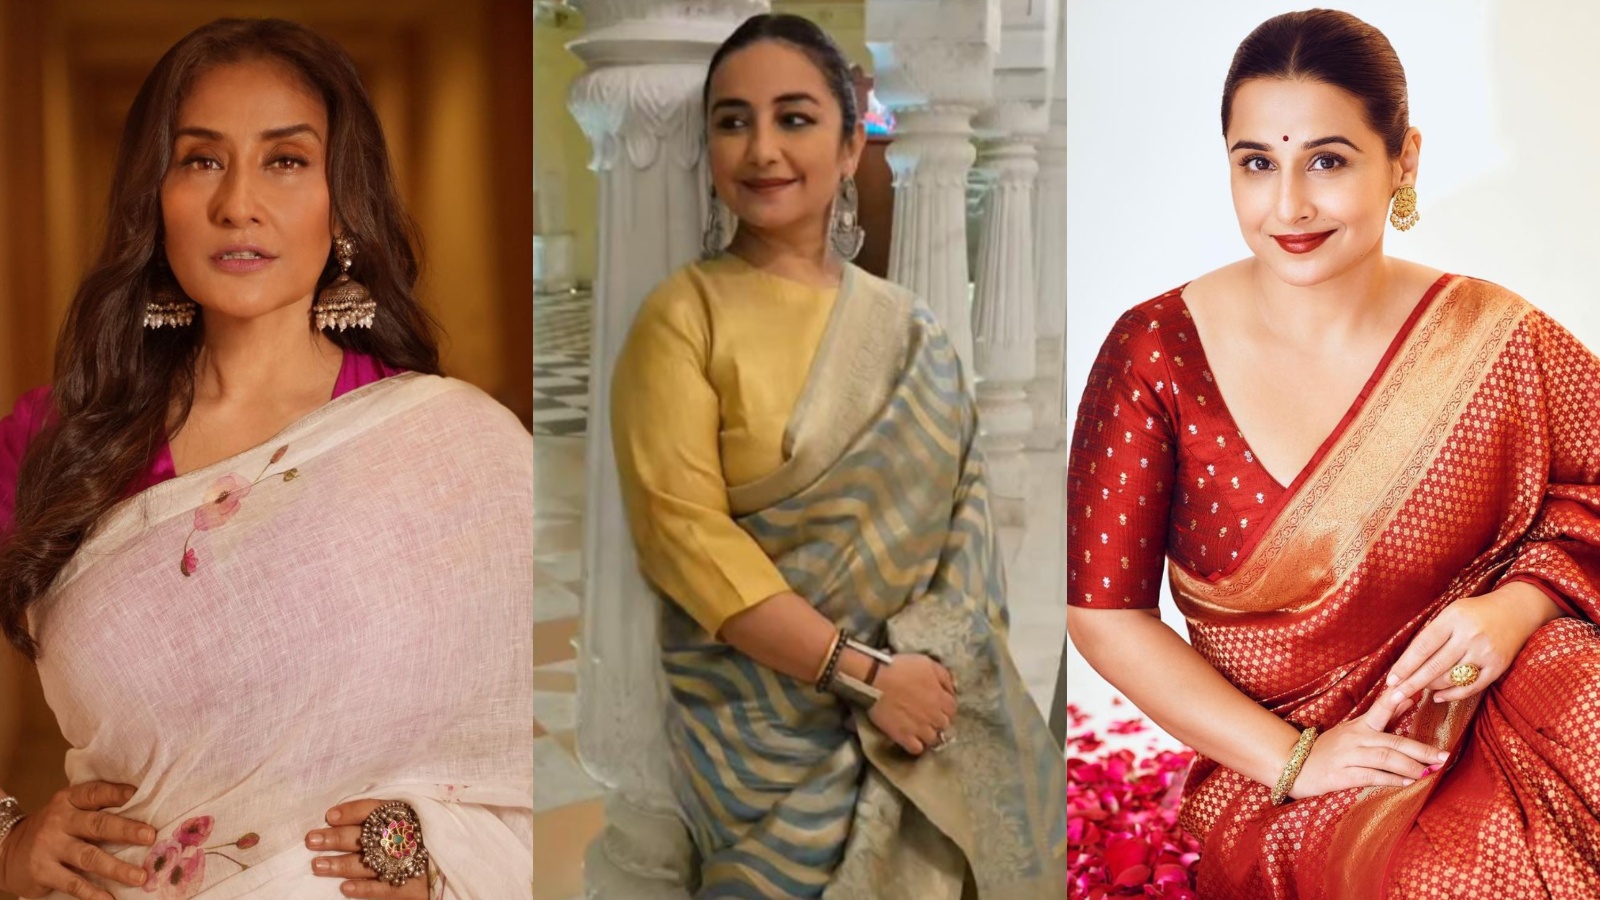 Divya Dutta says 90s was a 'confusing' time in her career, people would say  she 'looks like Manisha Koirala': 'Now they ask if I'm Vidya Balan's  sister' | Bollywood News - The